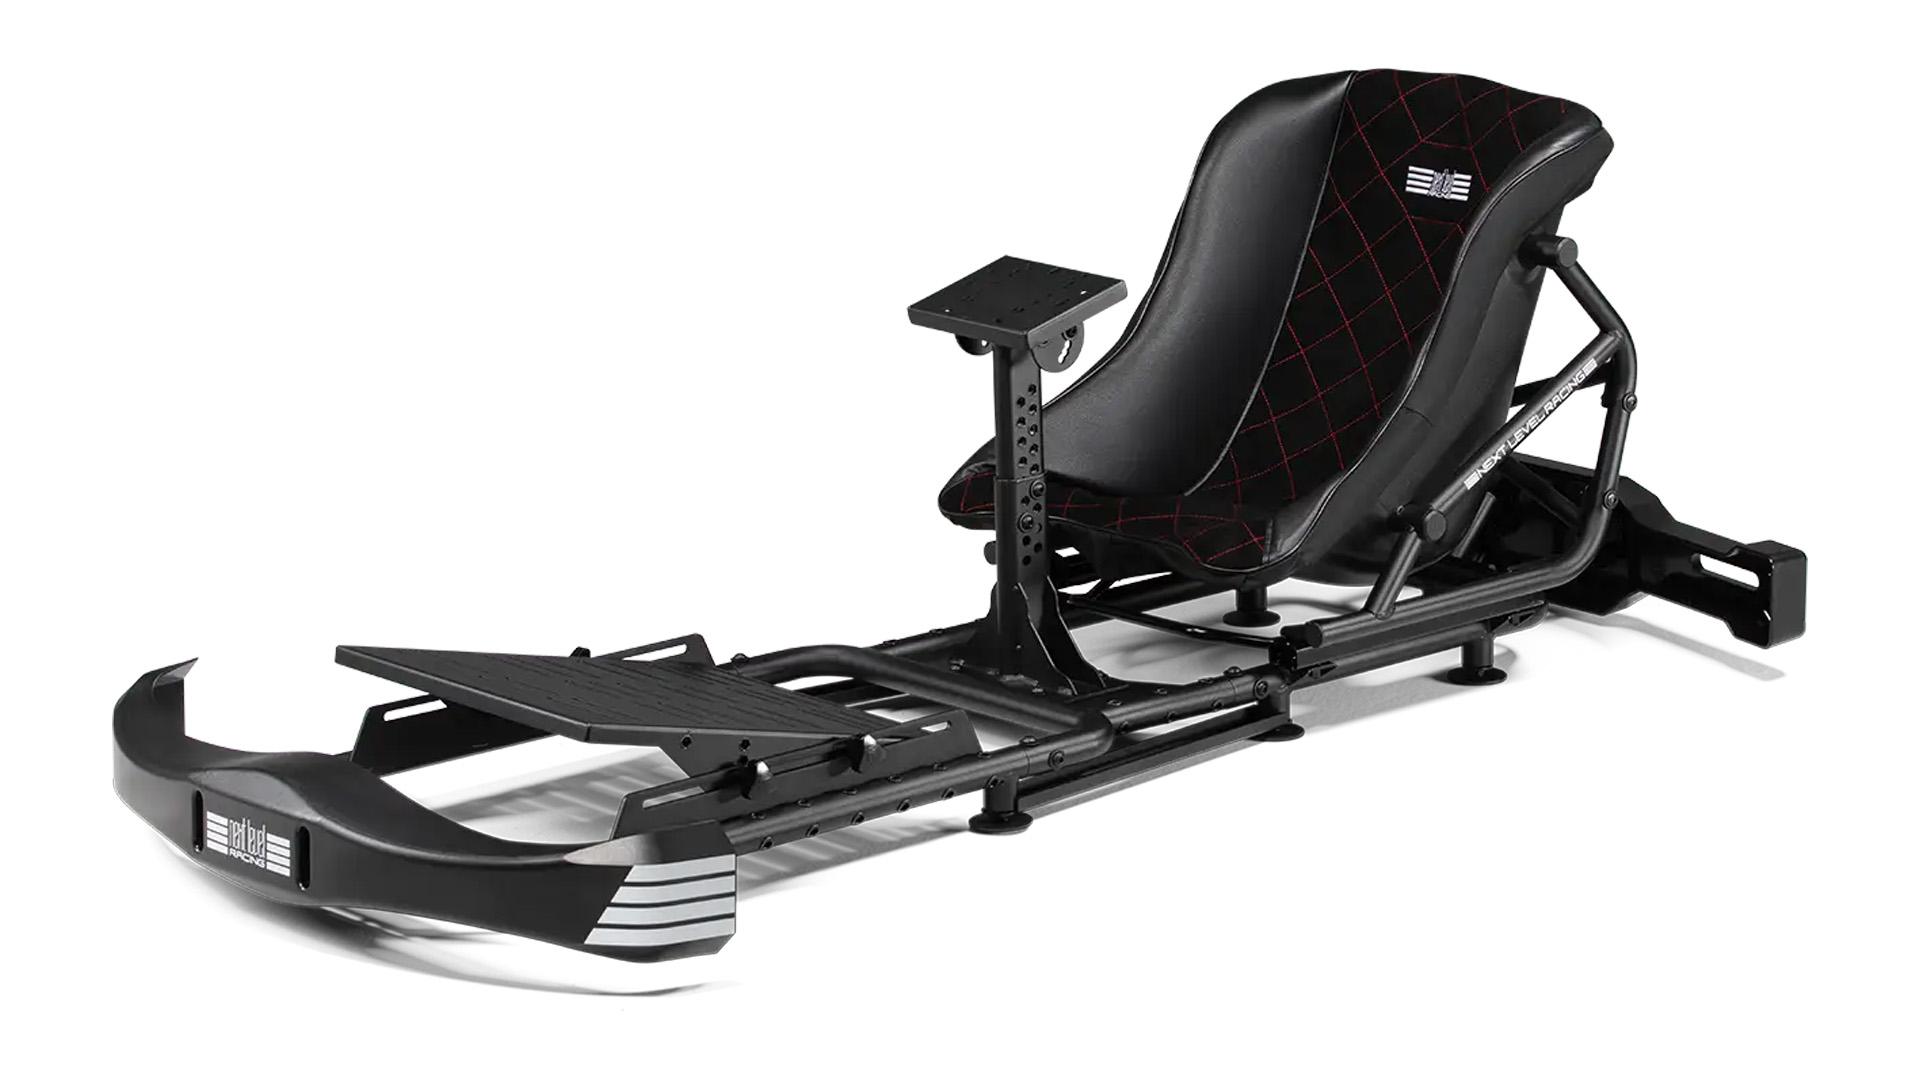 The Next Level Racing Go Kart Plus is a sim rig for future motorsport stars